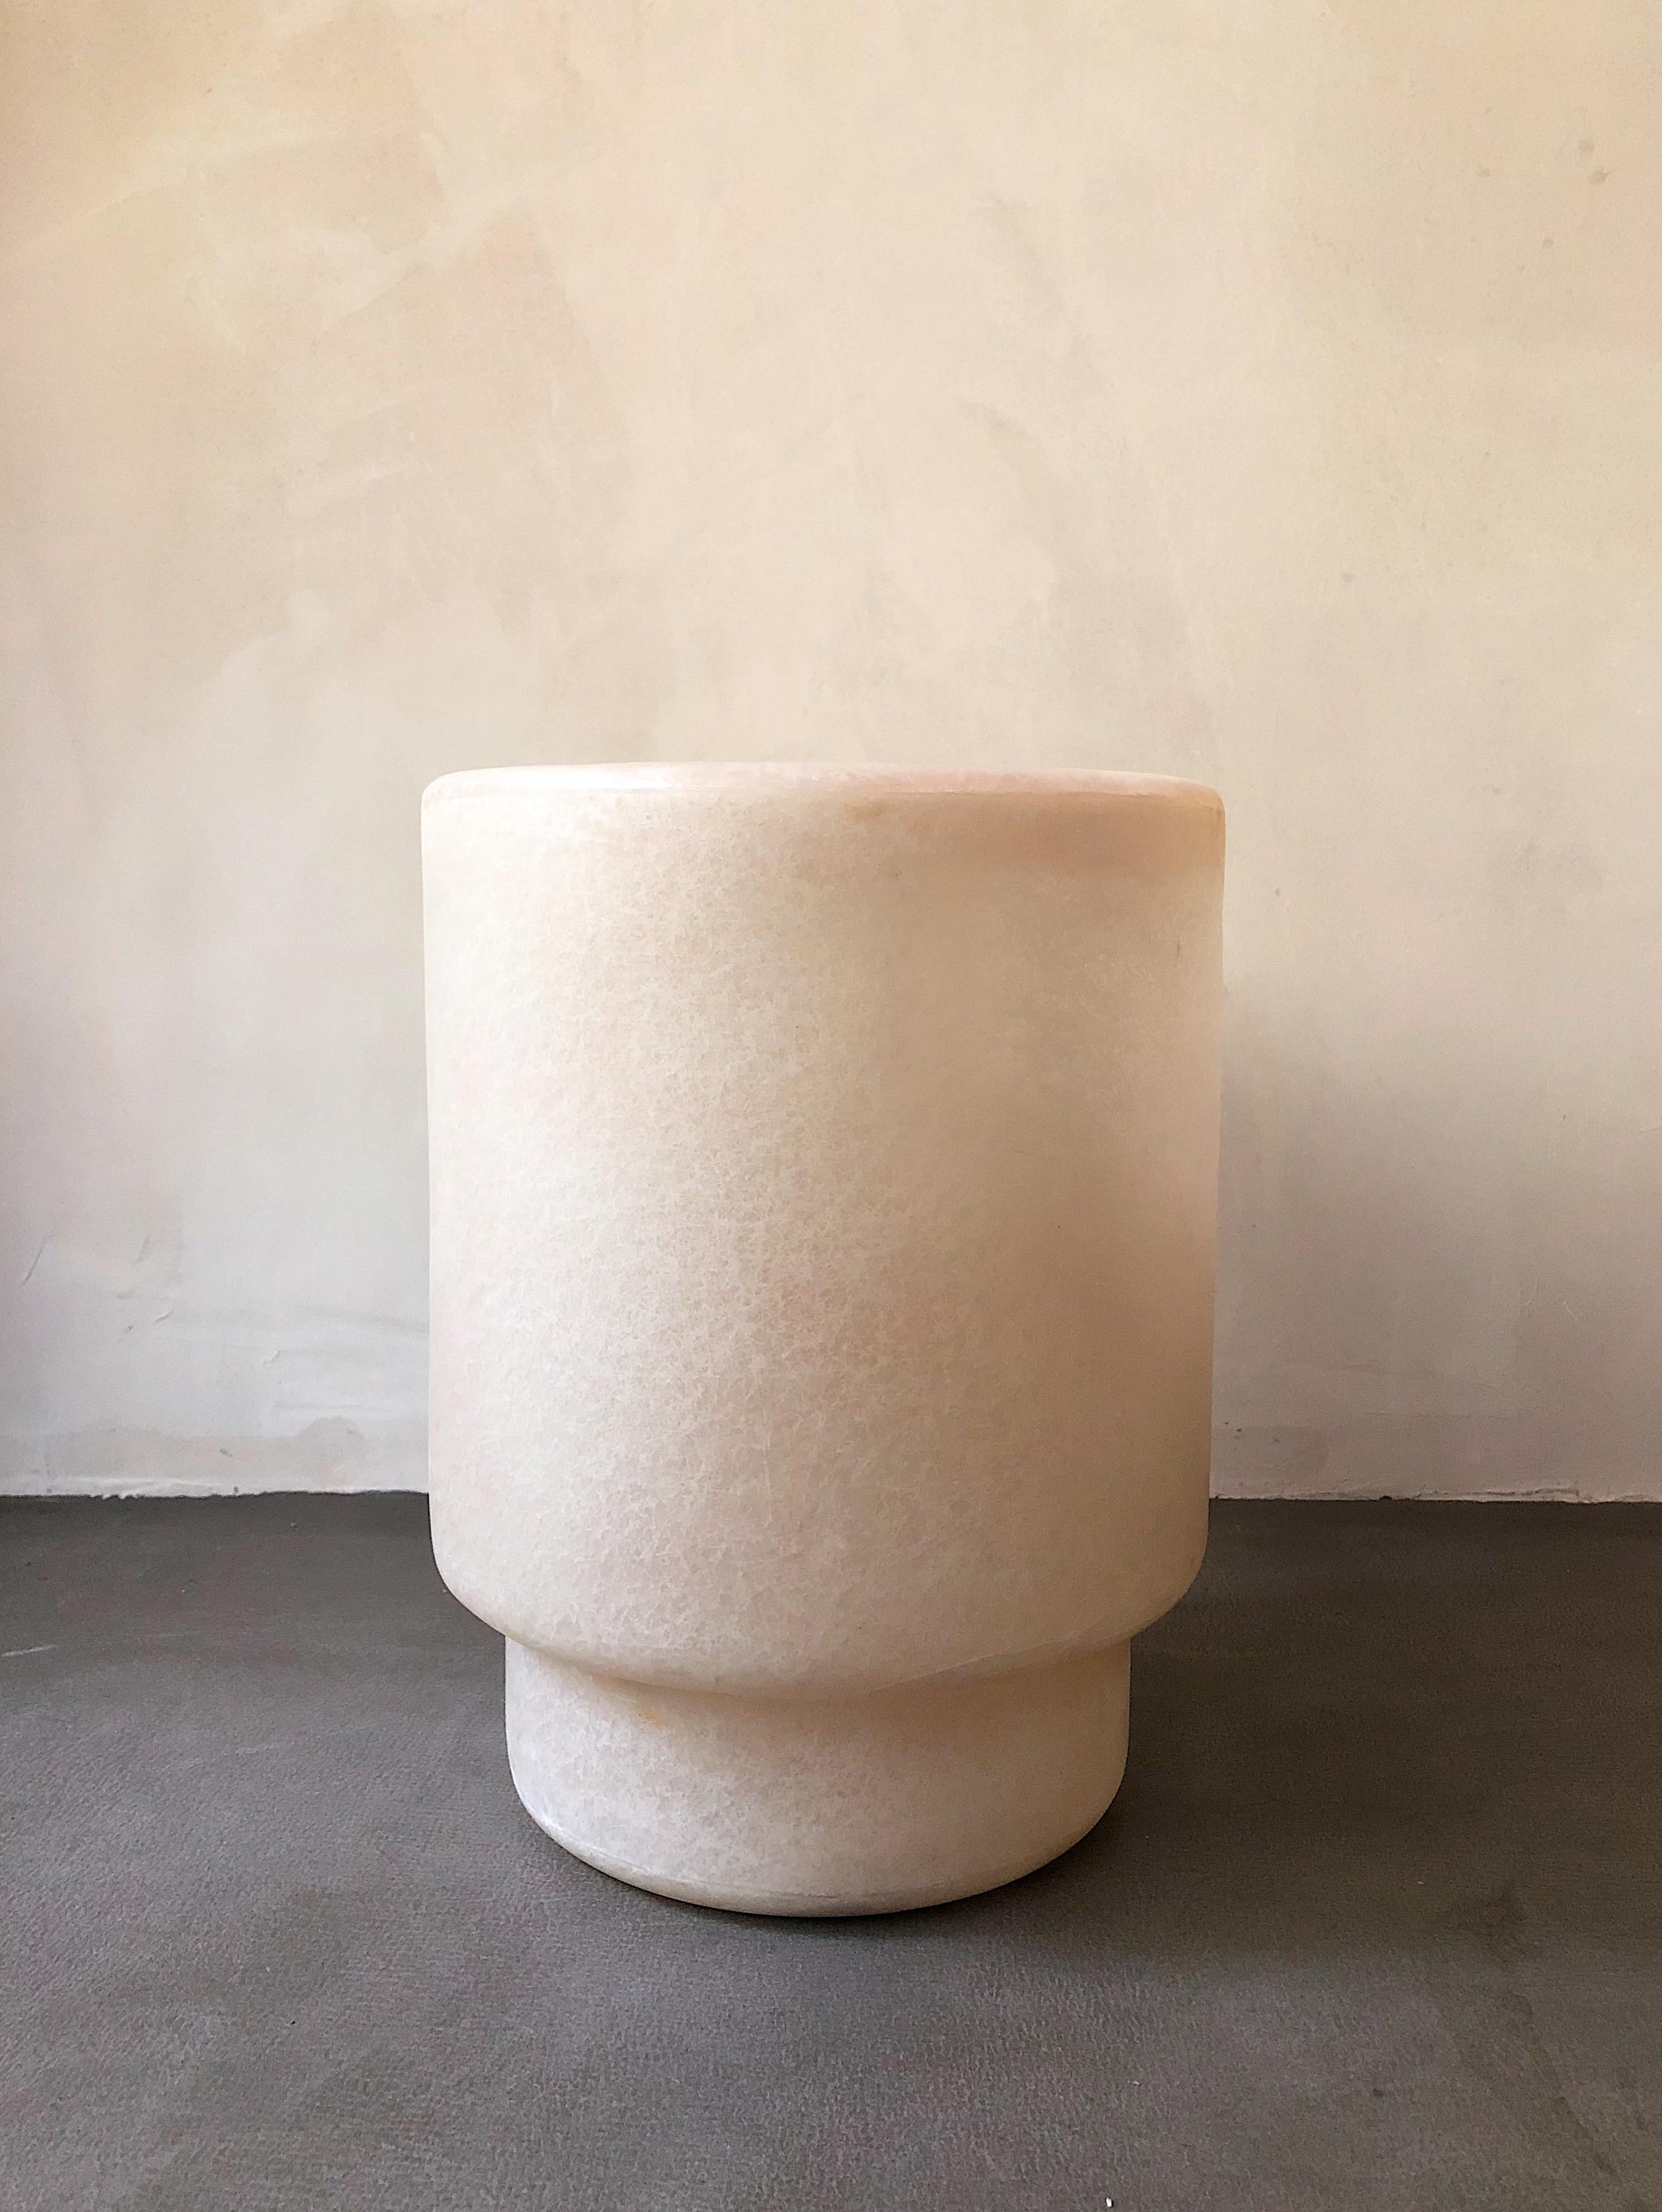 Tong white vase by kar
Materials: FRP
Dimensions: 26 x 26 x 34 cm.
*This piece is suitable for outdoor use.
A smooth shape for integrating into any space. Multiple-use as a flower vase, a container for blueprints, posters, or as it originally